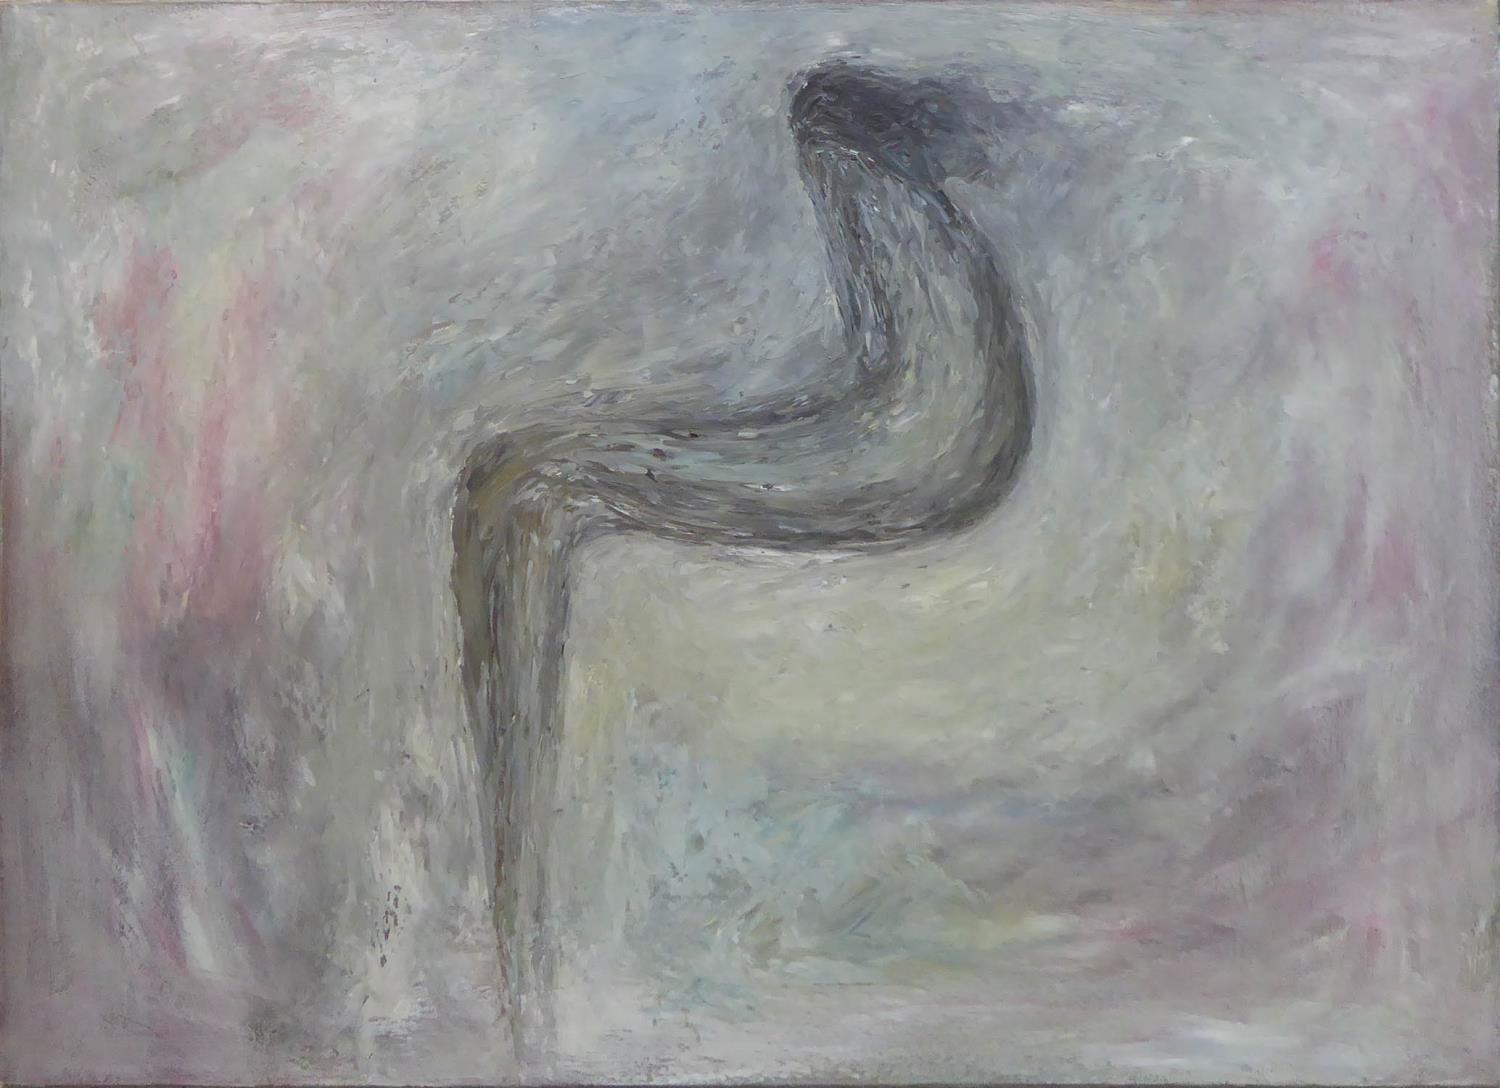 PHAM NGOC MINH (Contemporary Vietnamese) 'Abstract', oil on canvas, purchased directly from the